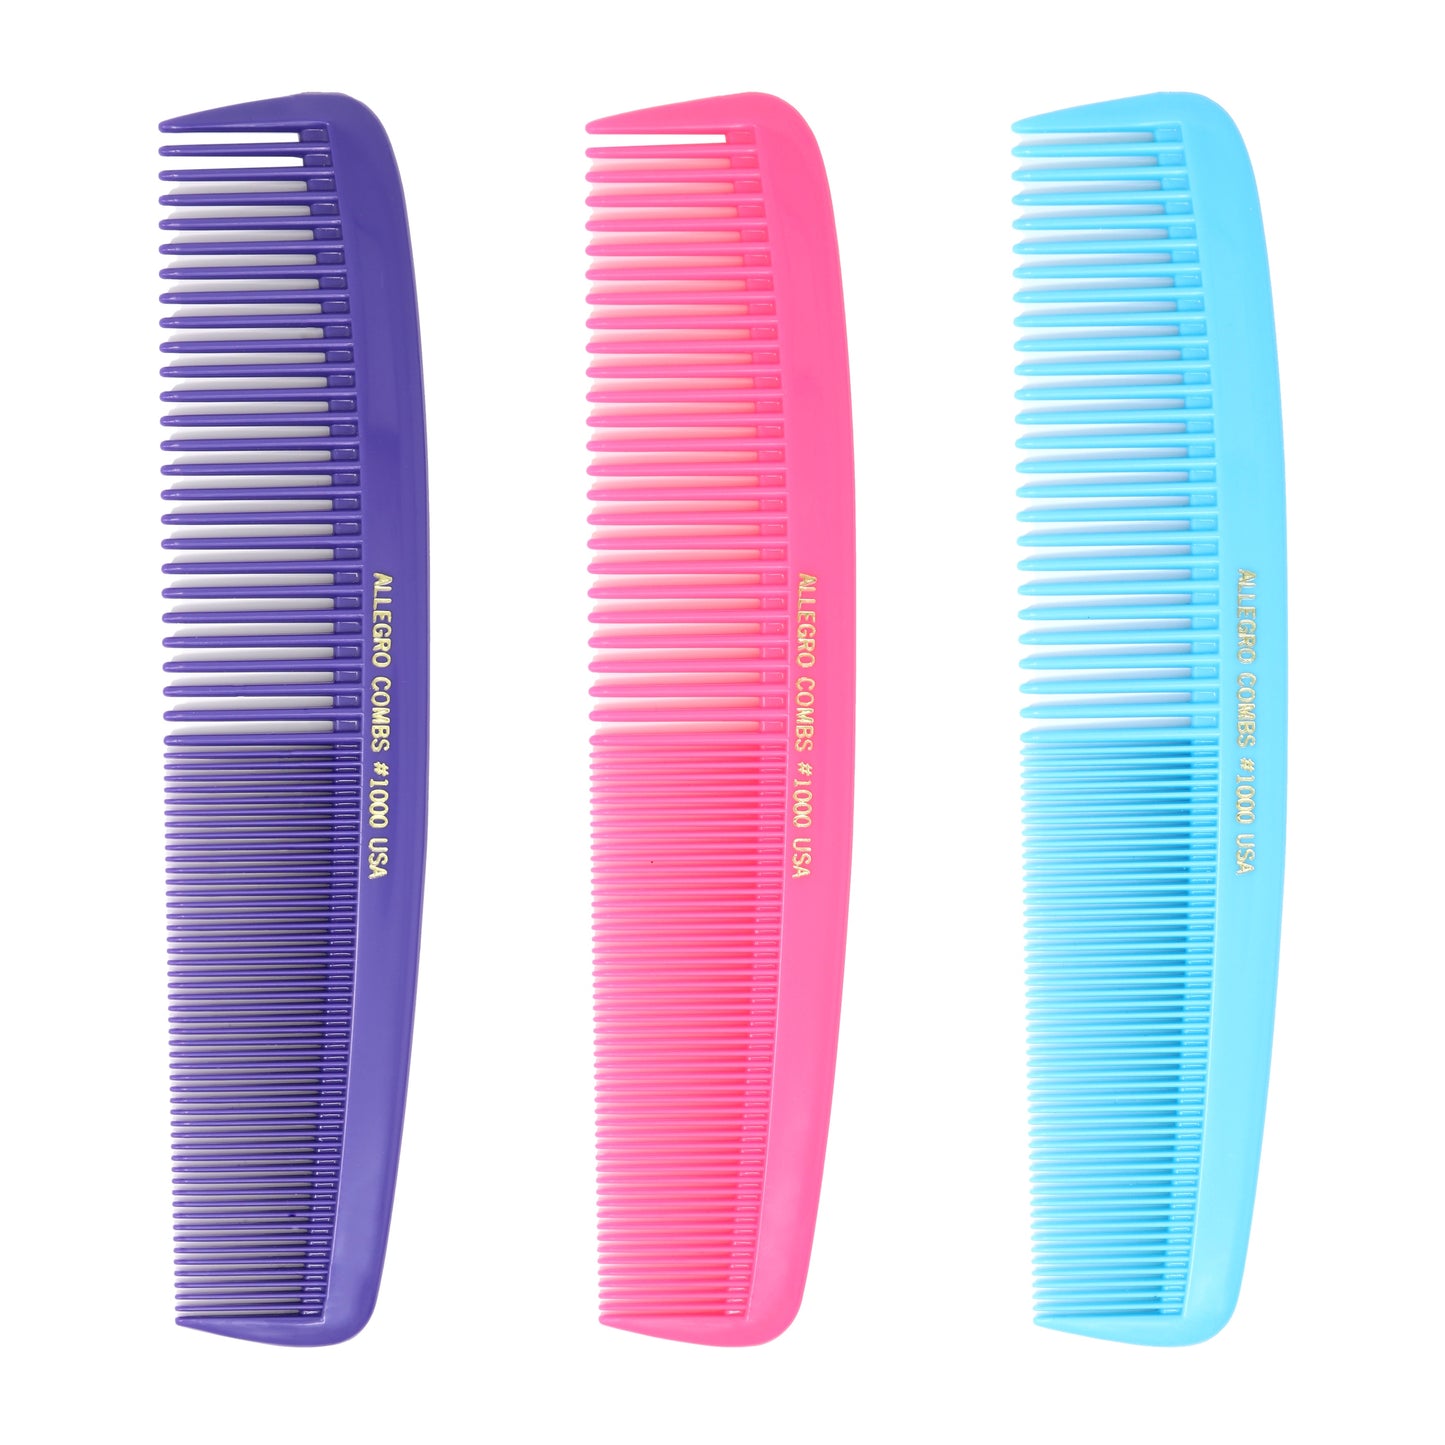 Allegro Combs 1000 X-Large Styling Comb Hair Cutting Barber Stylist Combs All Purpose Wide And Fine Tooth Made In The USA